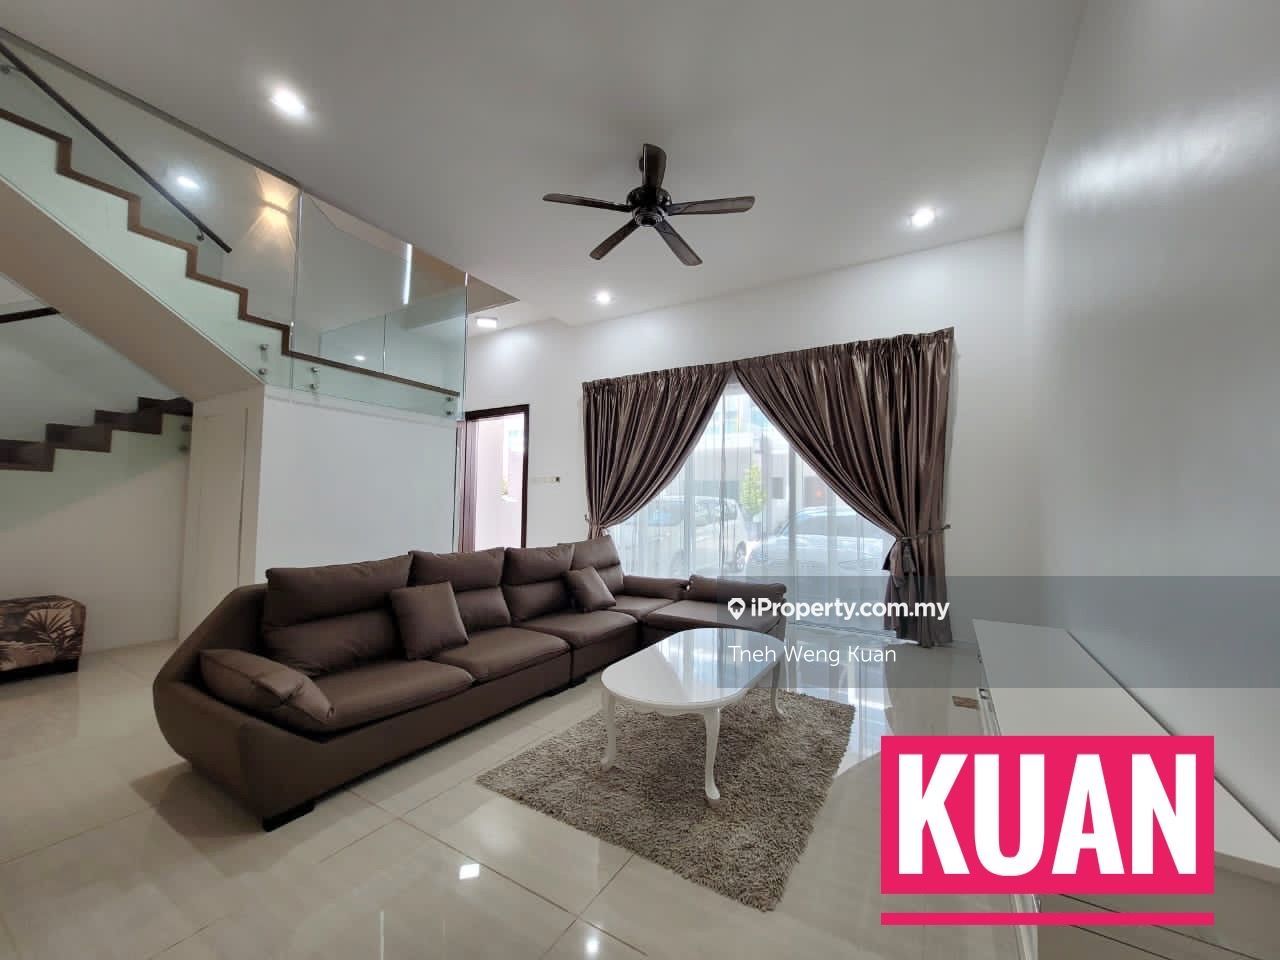 Tanjung Bungah 3-sty Terrace/Link House 4 bedrooms for rent | iProperty ...